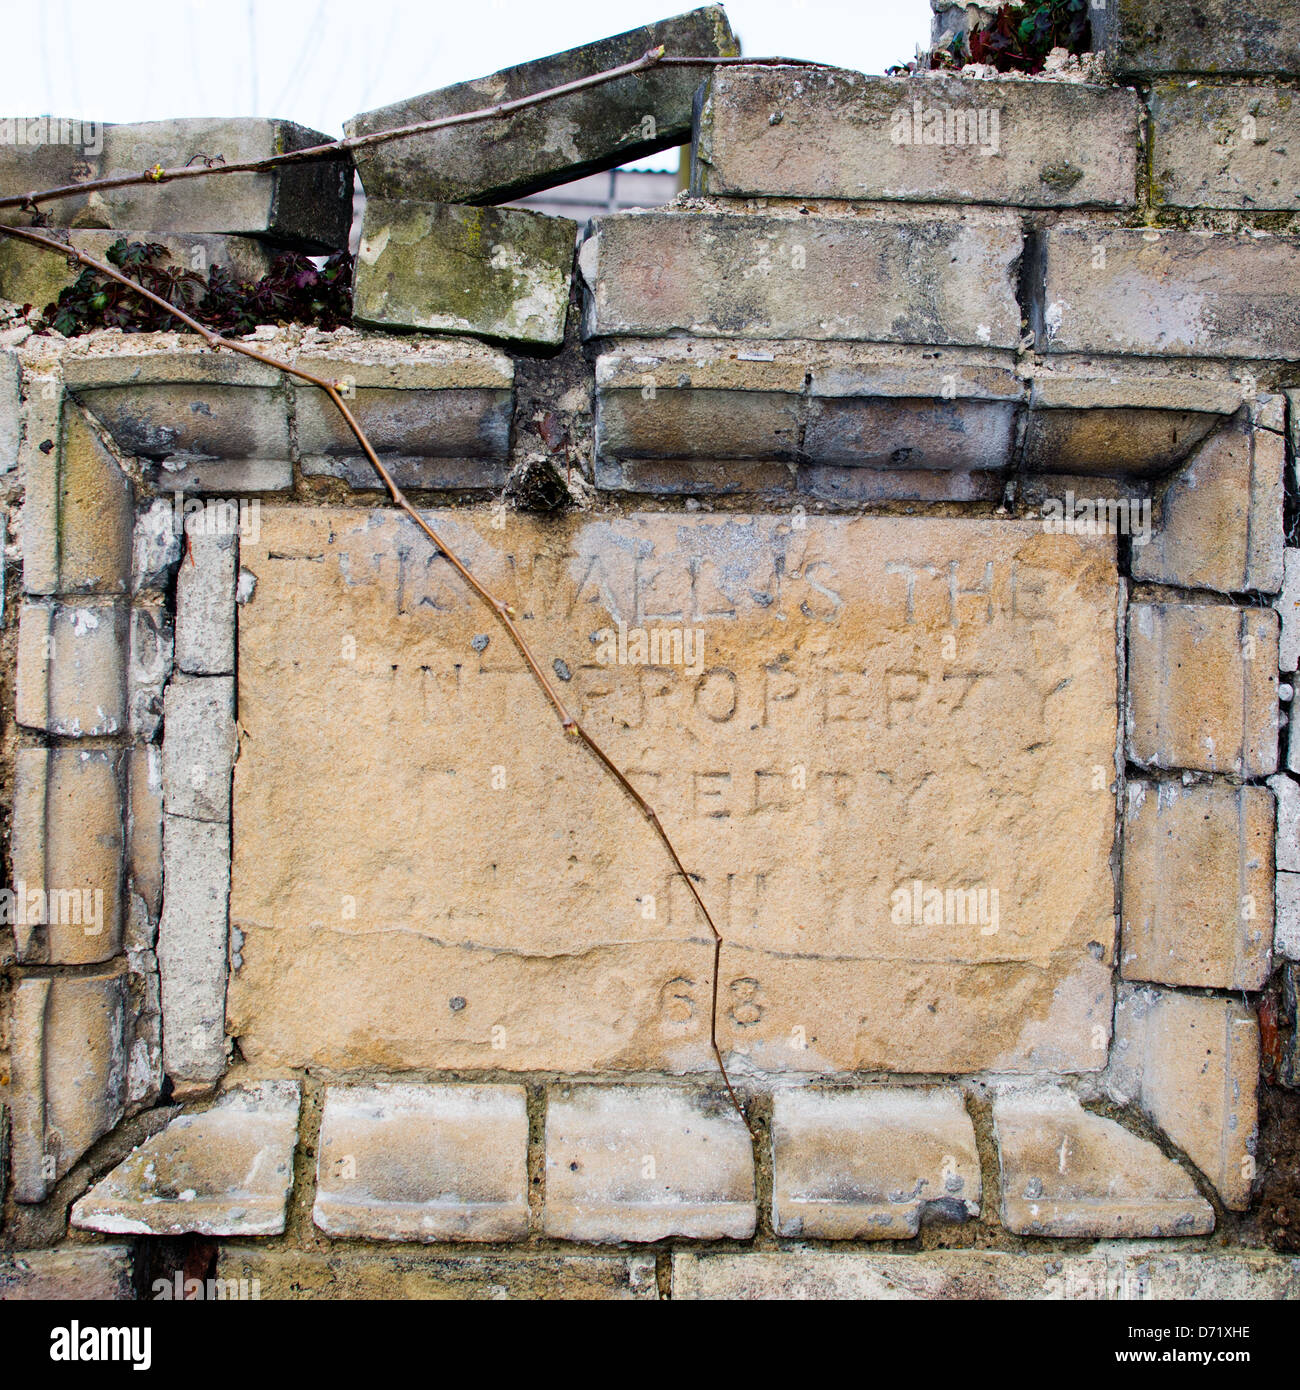 A stone tablet set in an old wall, marking the wall's ownership. The faded inscription suggests 19th Century. Stock Photo